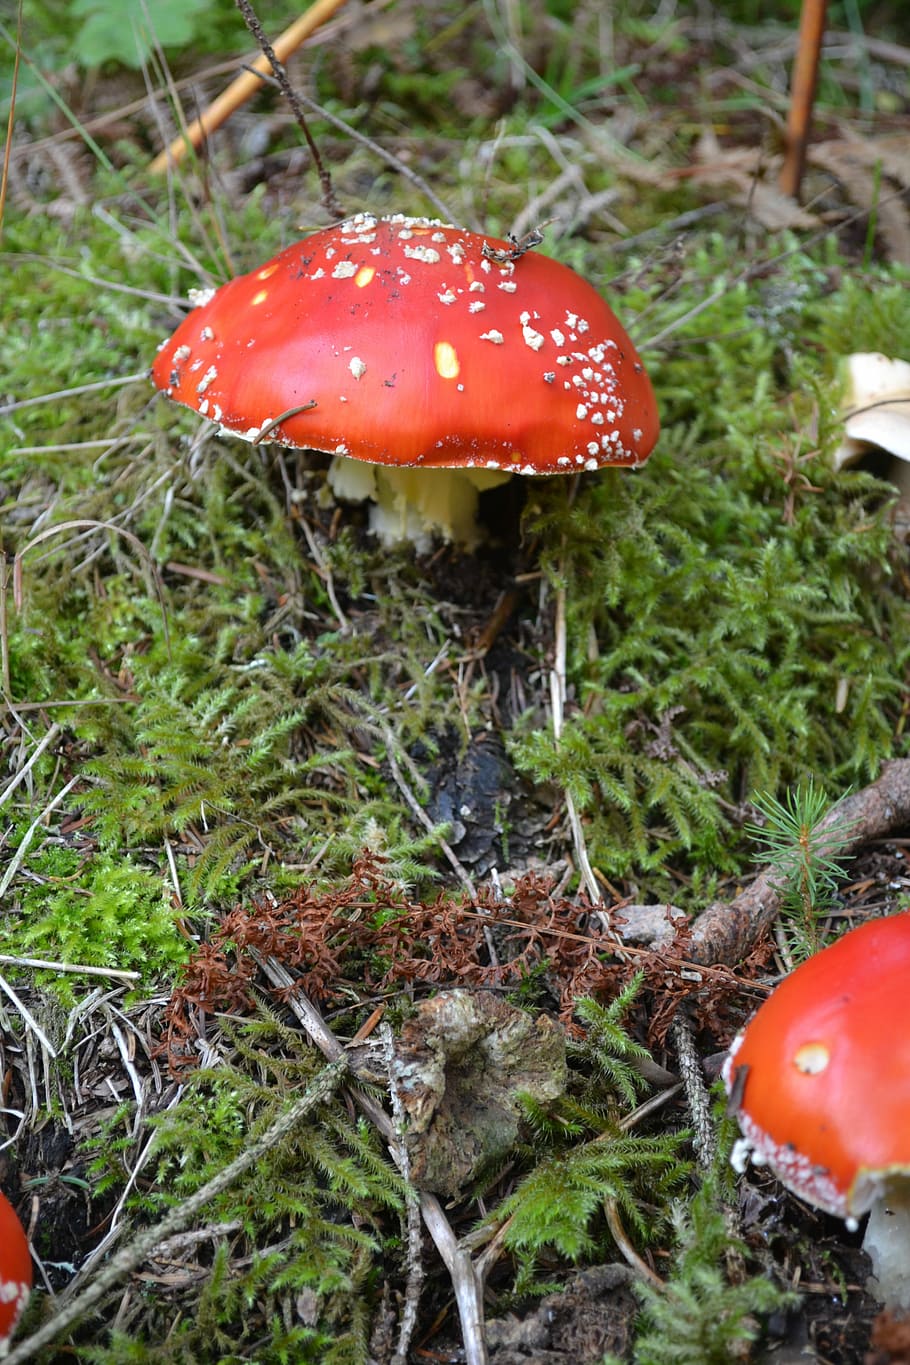 Fly Agaric, Mushrooms, Amanita Muscaria, fly agaric, mushrooms, poisonous, red, natural, nature, forest, mushroom